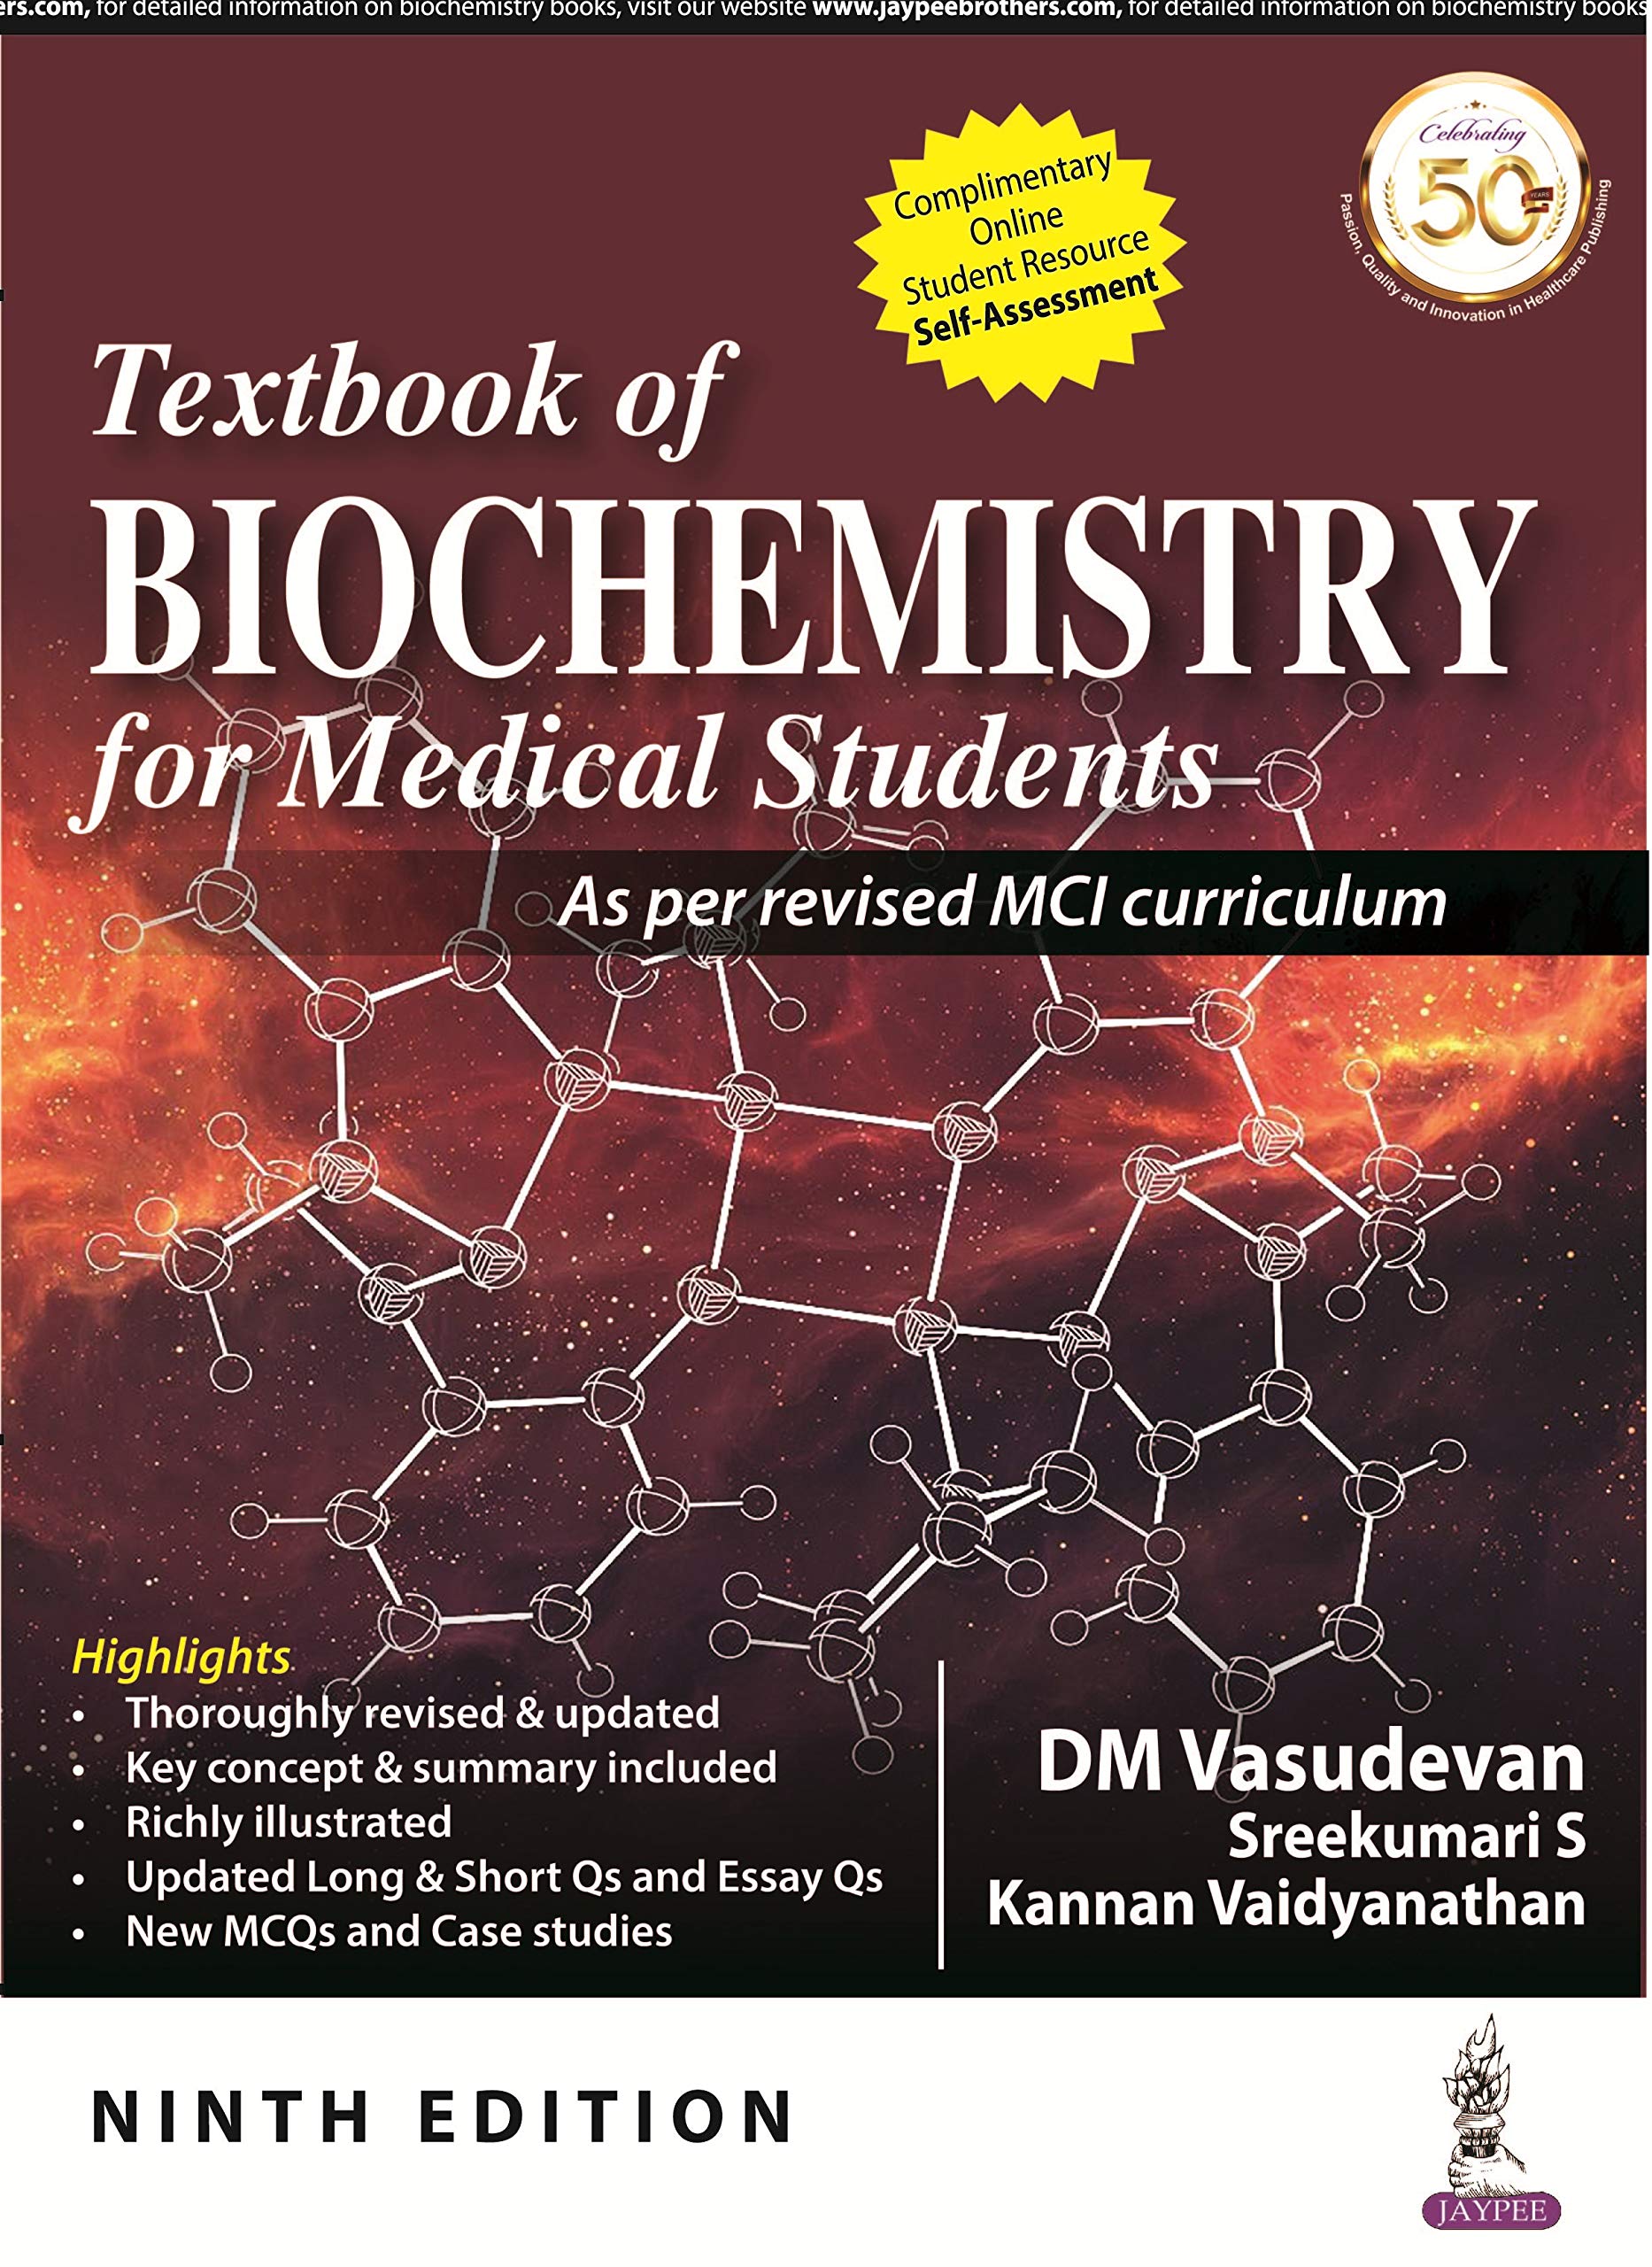 Photo of Textbook of Biochemistry For Medical Students 9th Edition PDF Free Download